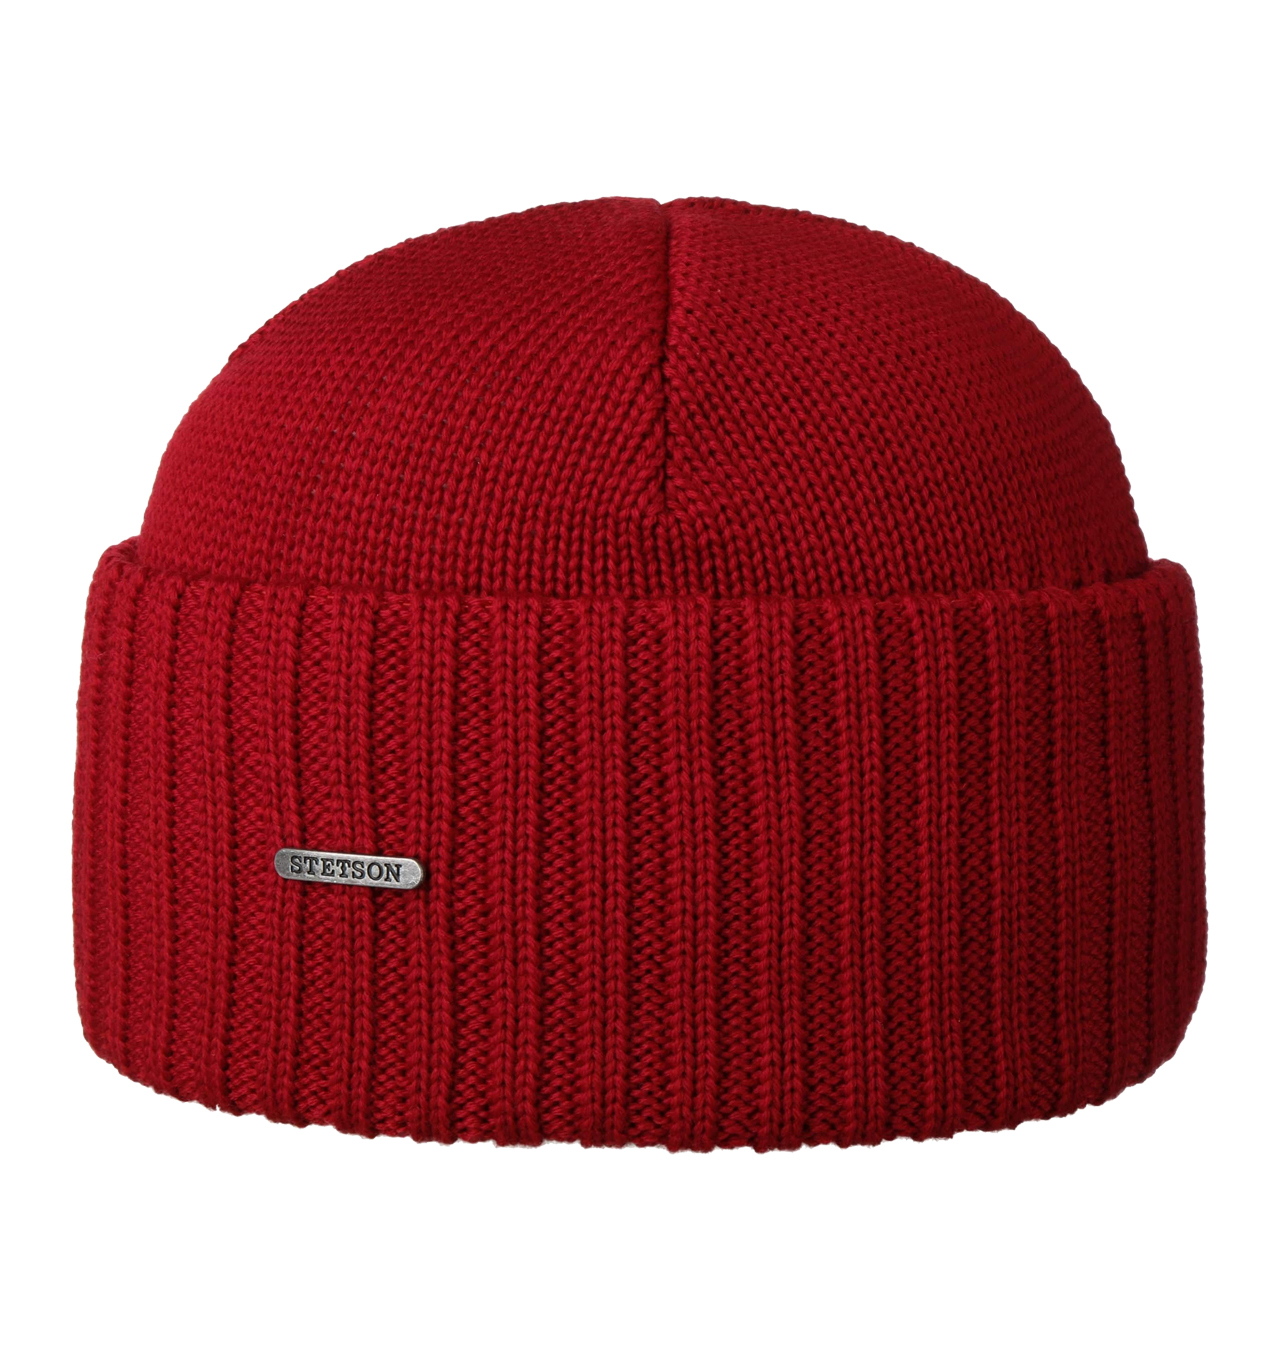 Stetson - Northport Wool Beanie - Red